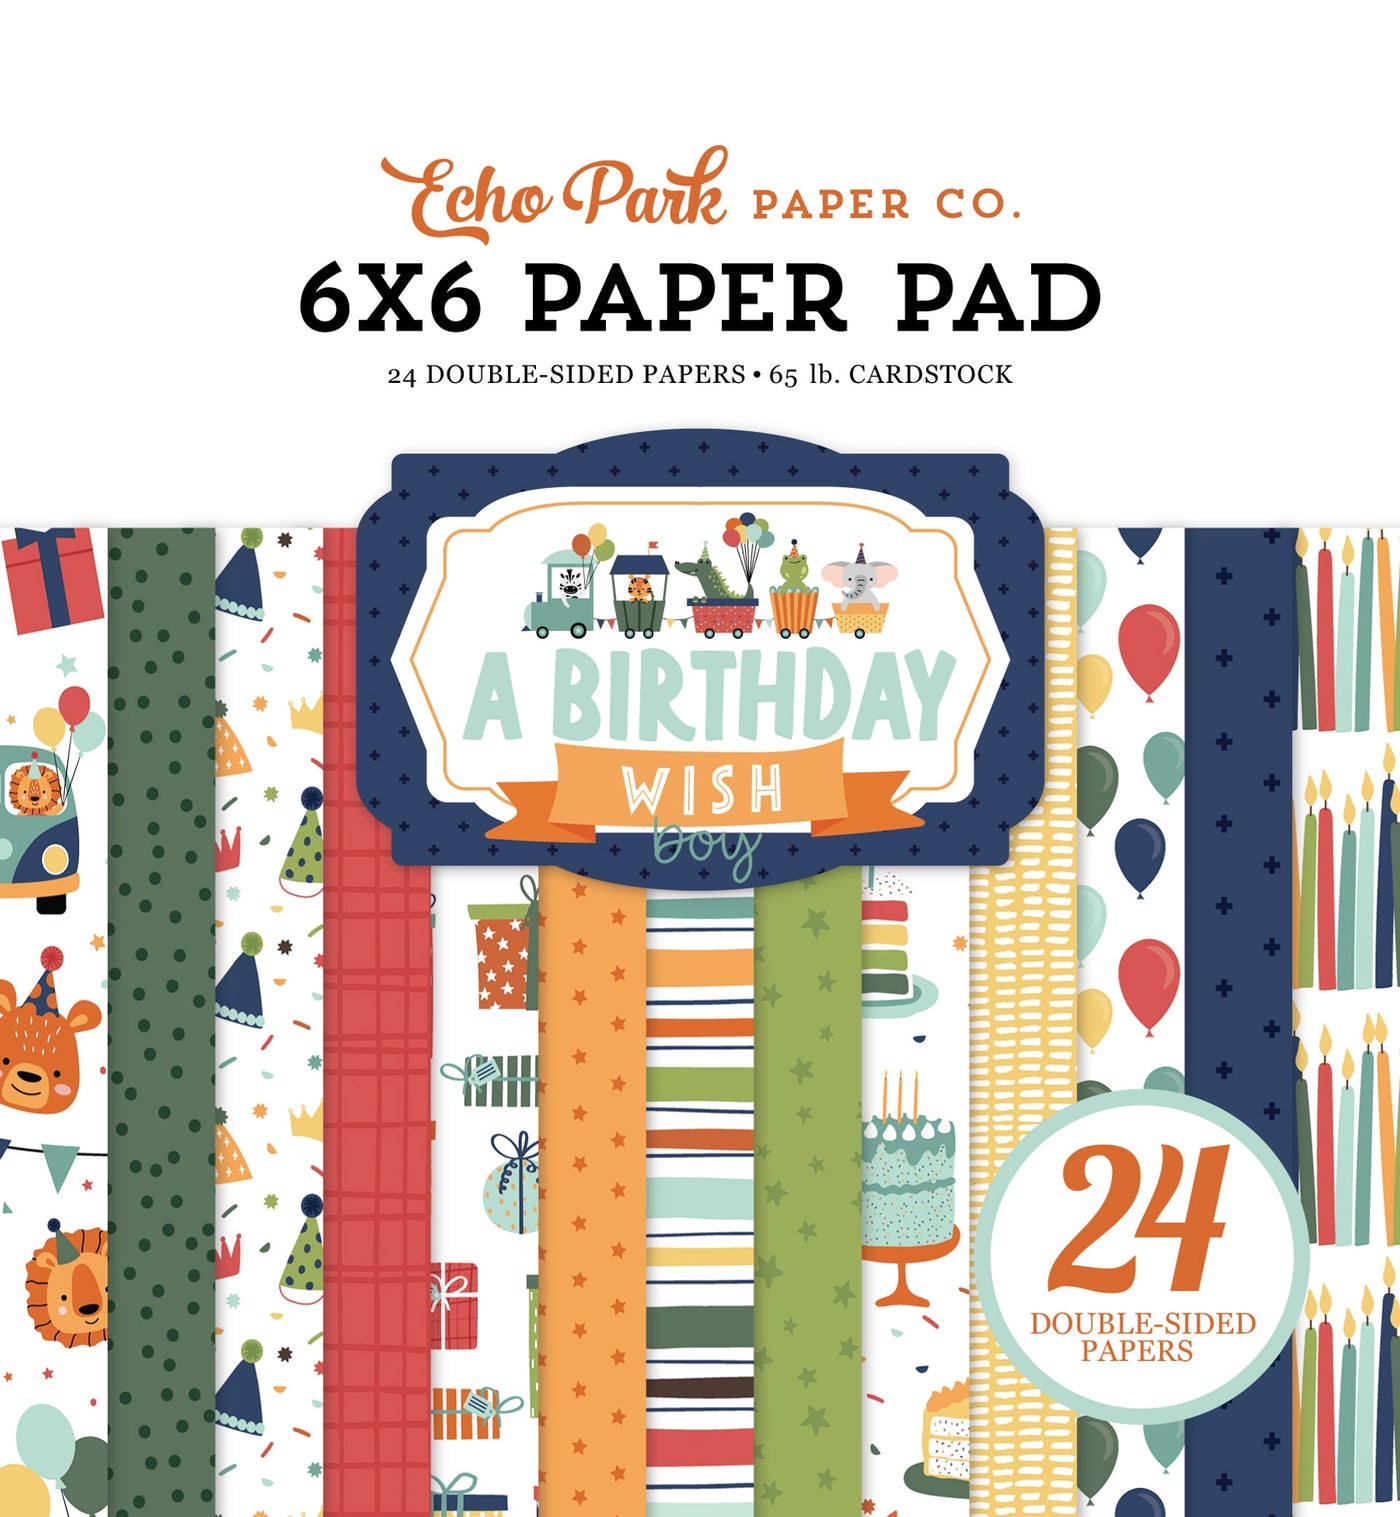 BIRTHDAY BOY 6x6 Paper Pad, Echo Park - 6x6 pad with 24 double-sided sheets. Scaled-down images are great for card making and similar crafts. This pad features brightly colored birthday theme.